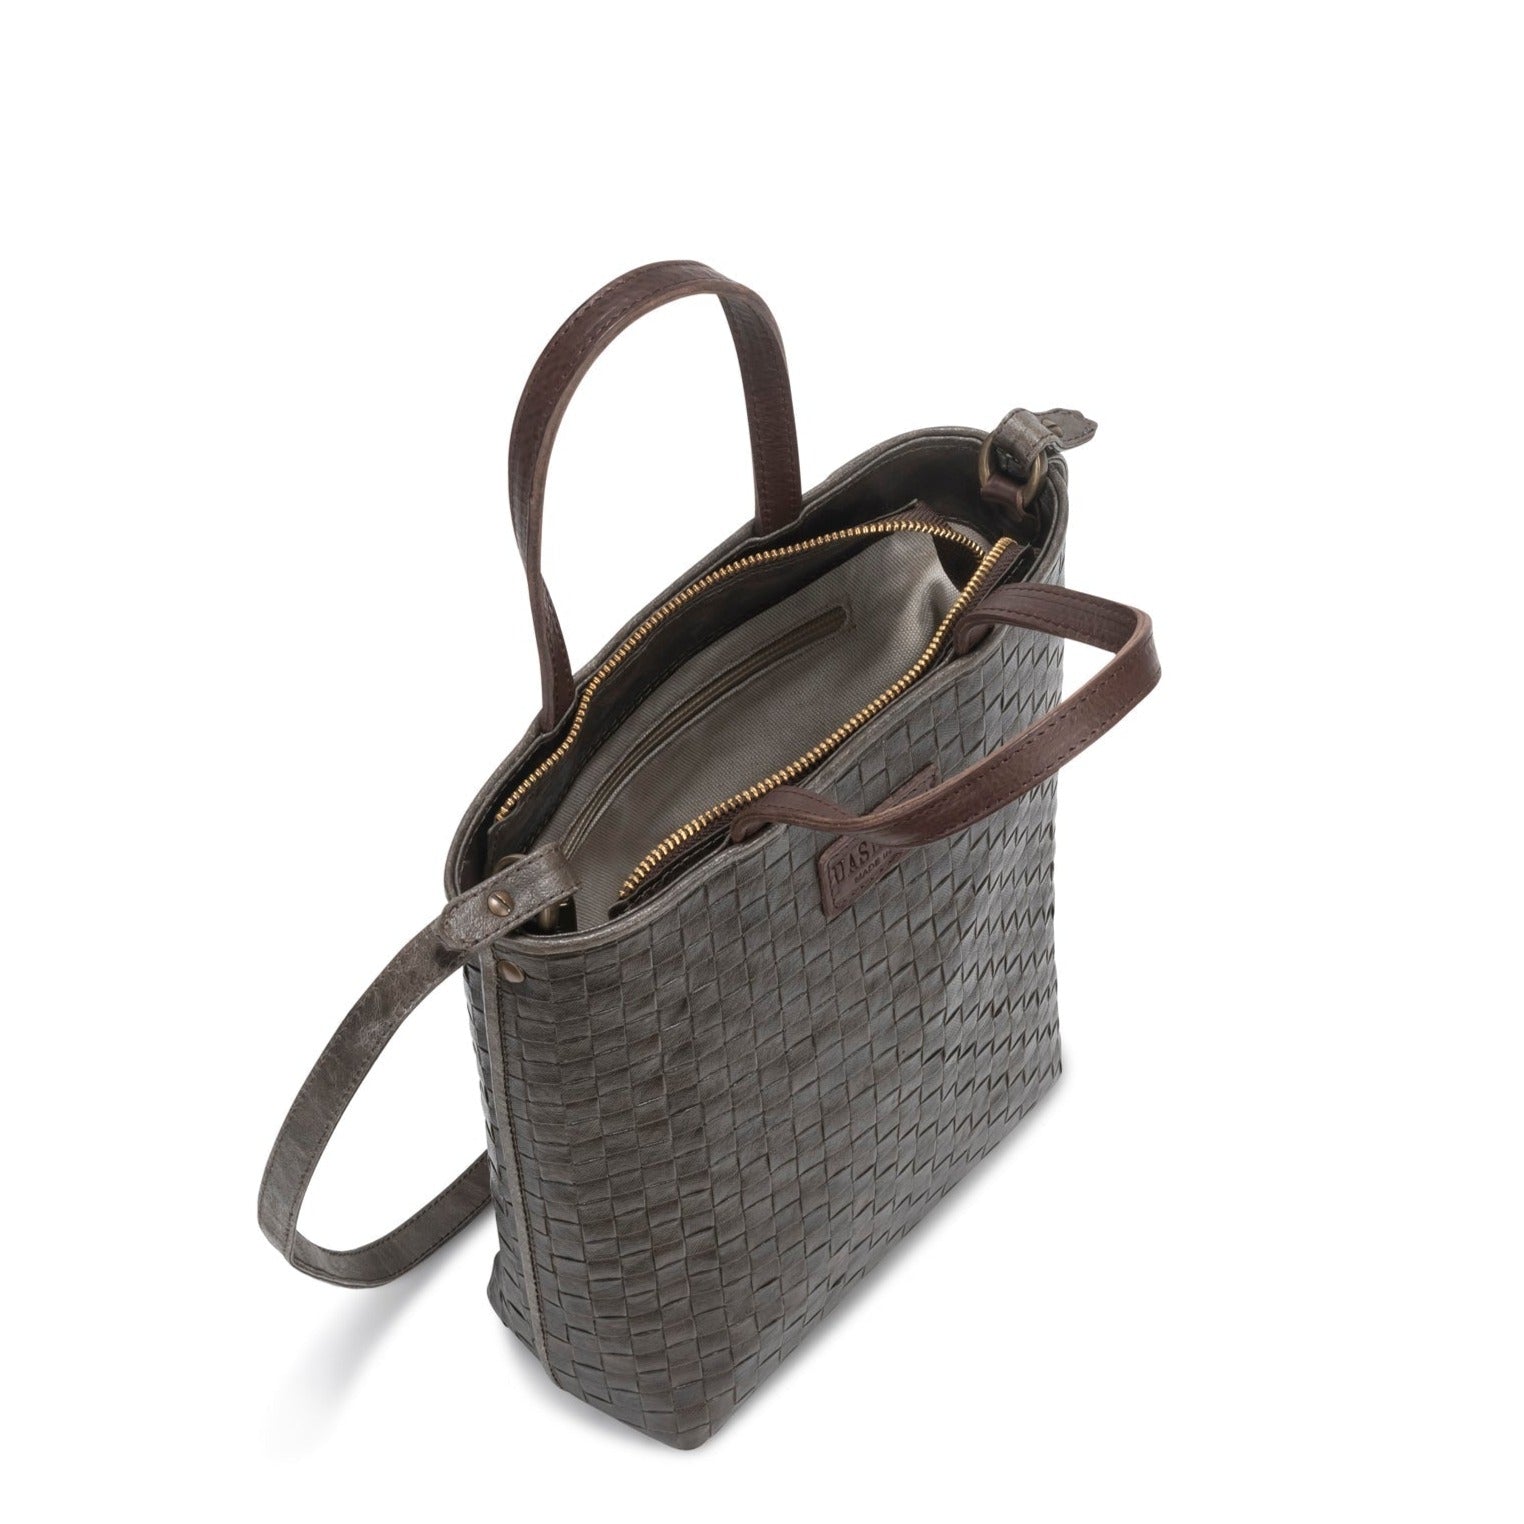 A woven washable paper tote bag is shown from a top-down angle, unzipped to reveal an inside zip pocket. It is grey-brown in colour.